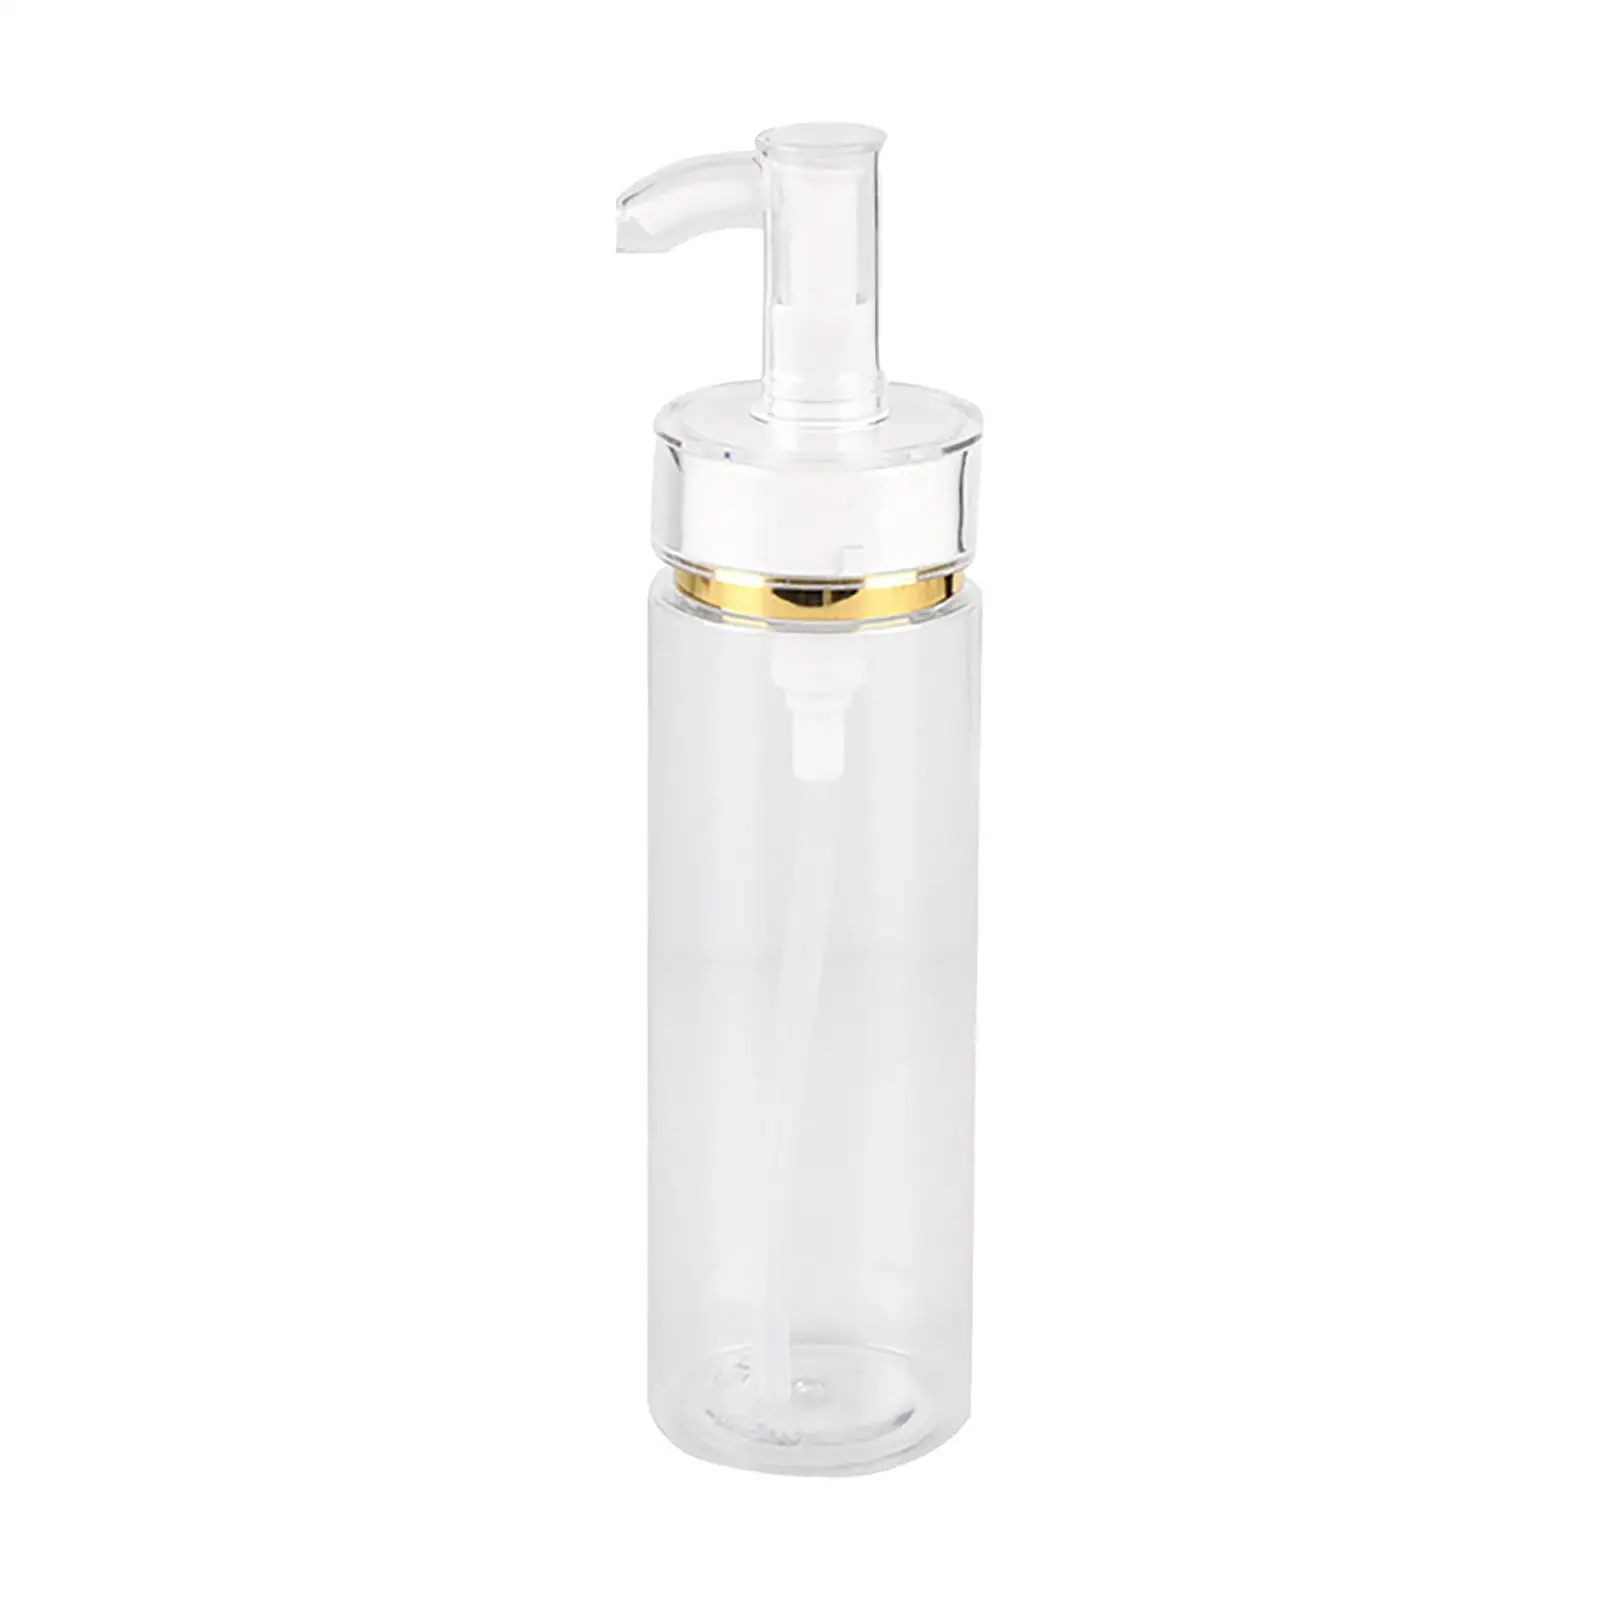 5oz Shampoo Bottles with Pumps Portable Clear Refillable Travel Container for Shampoo Lotion Cream Hand Soap Washing Soap